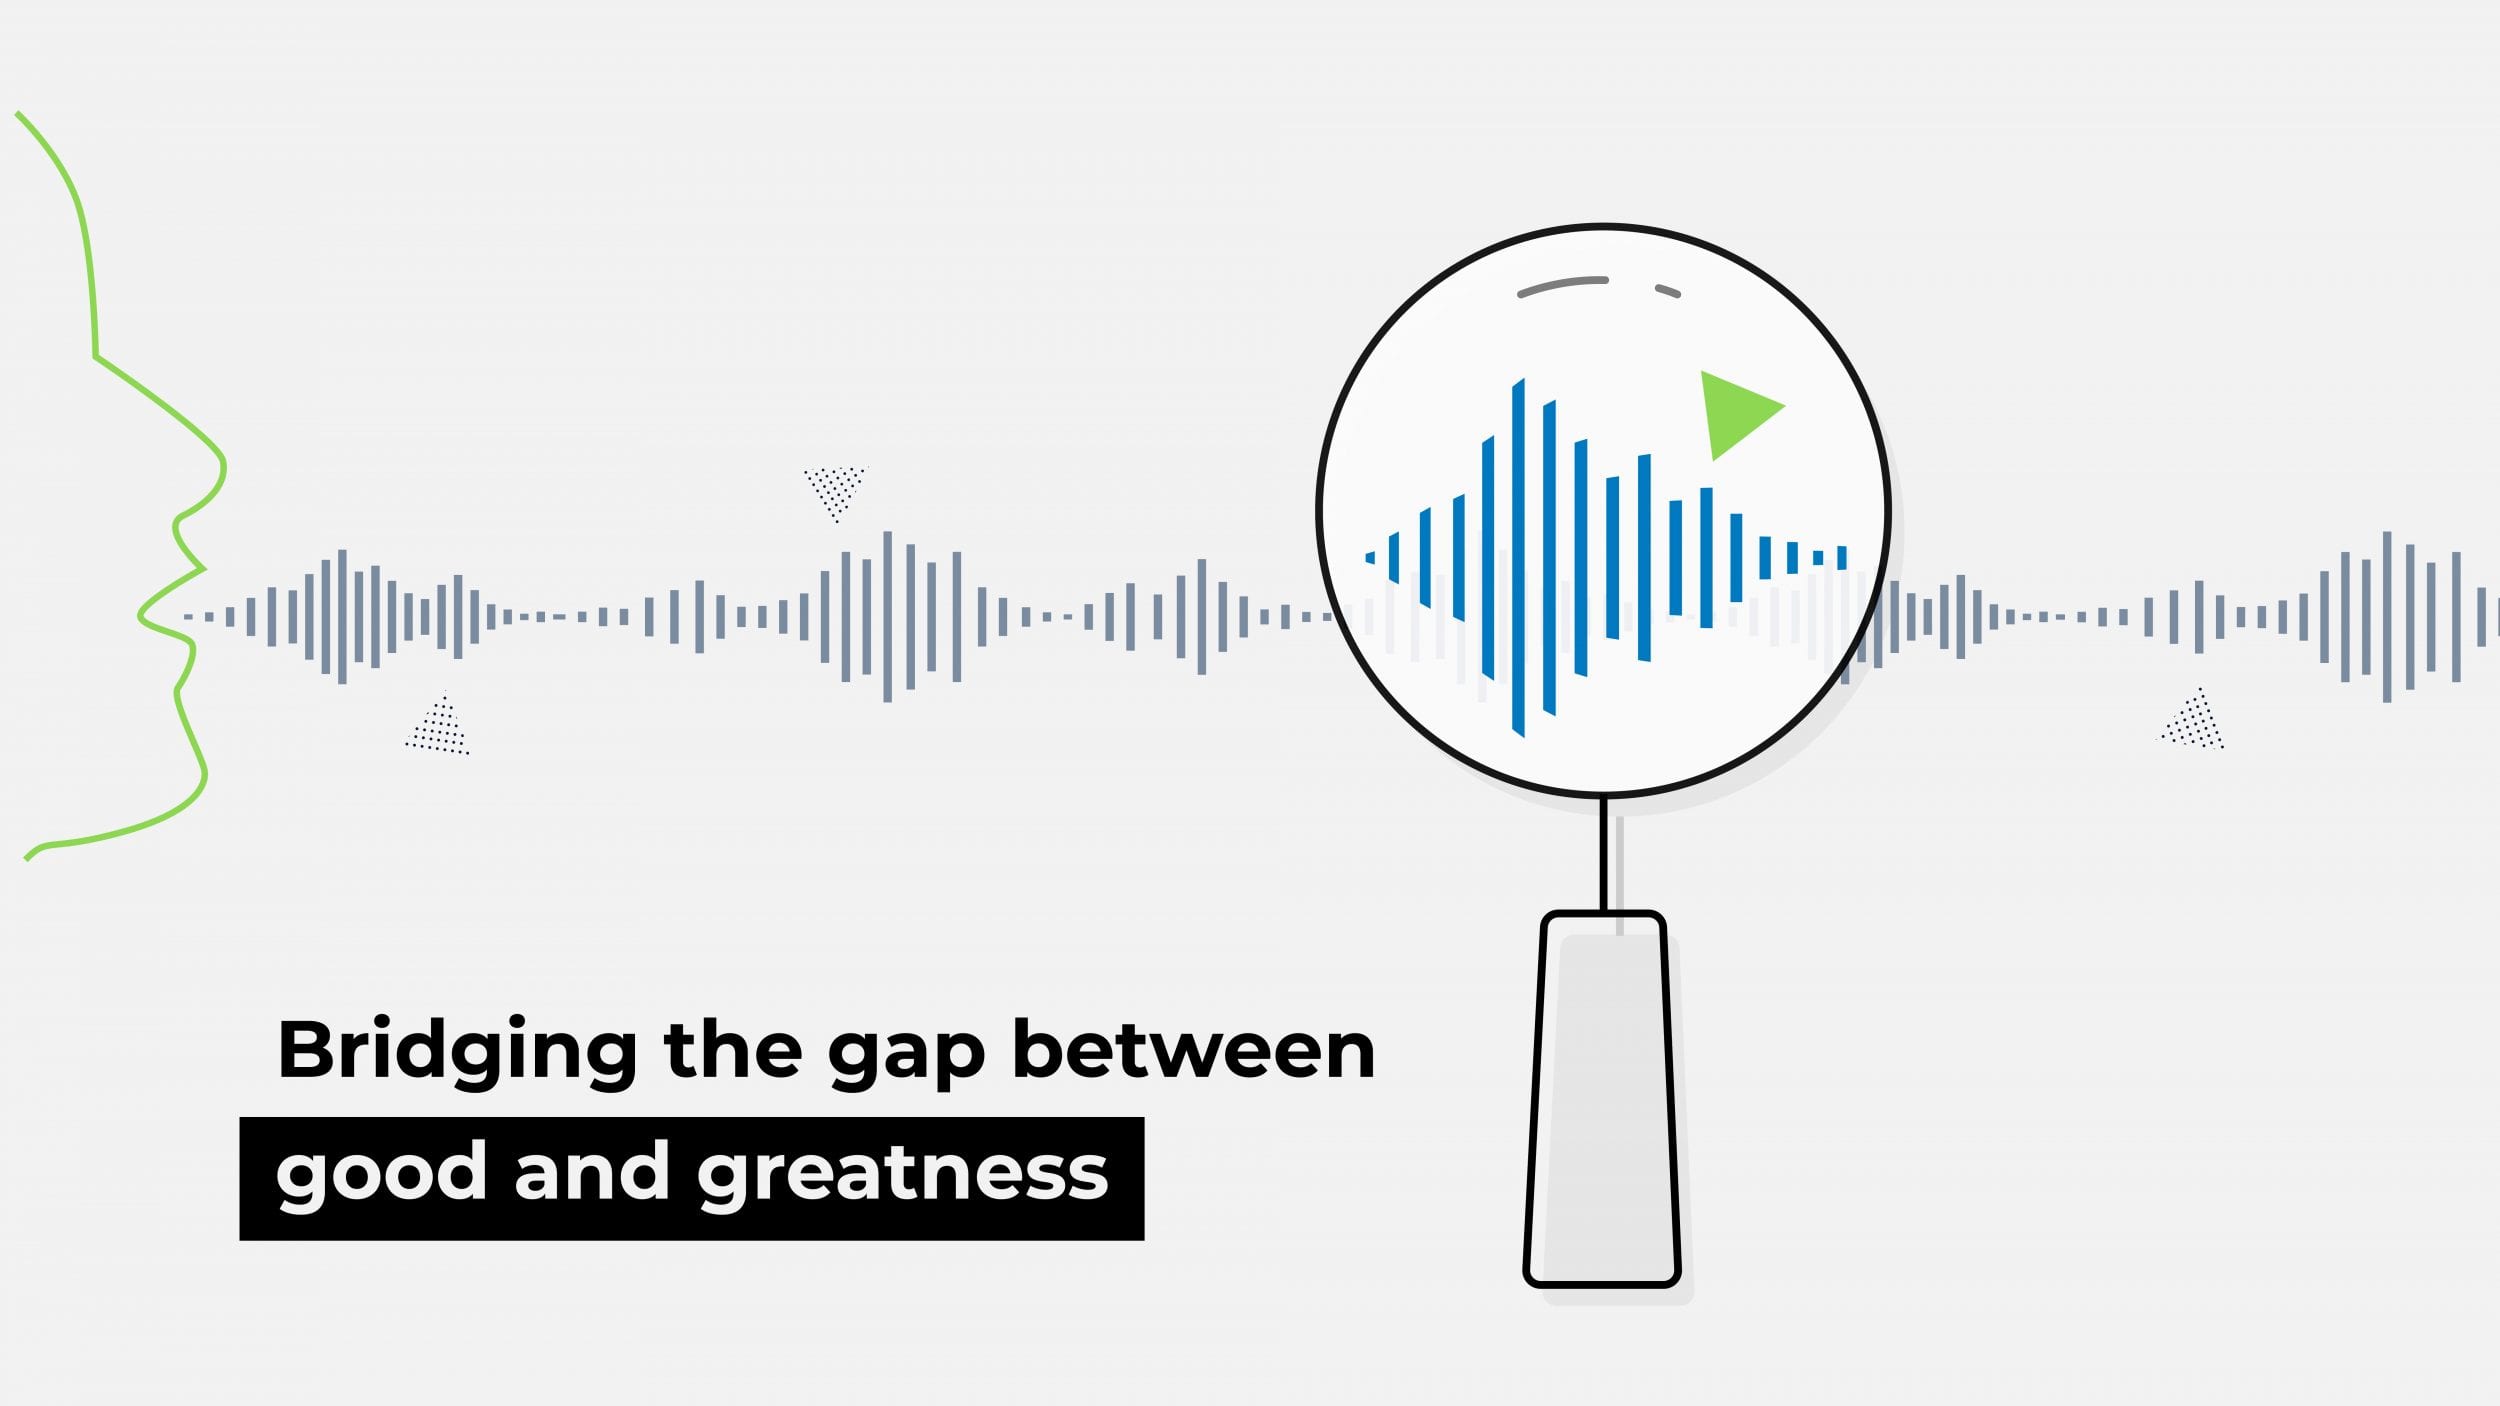 Speech Analytics: The Driving Force For Better Business Practices and Customer Experience